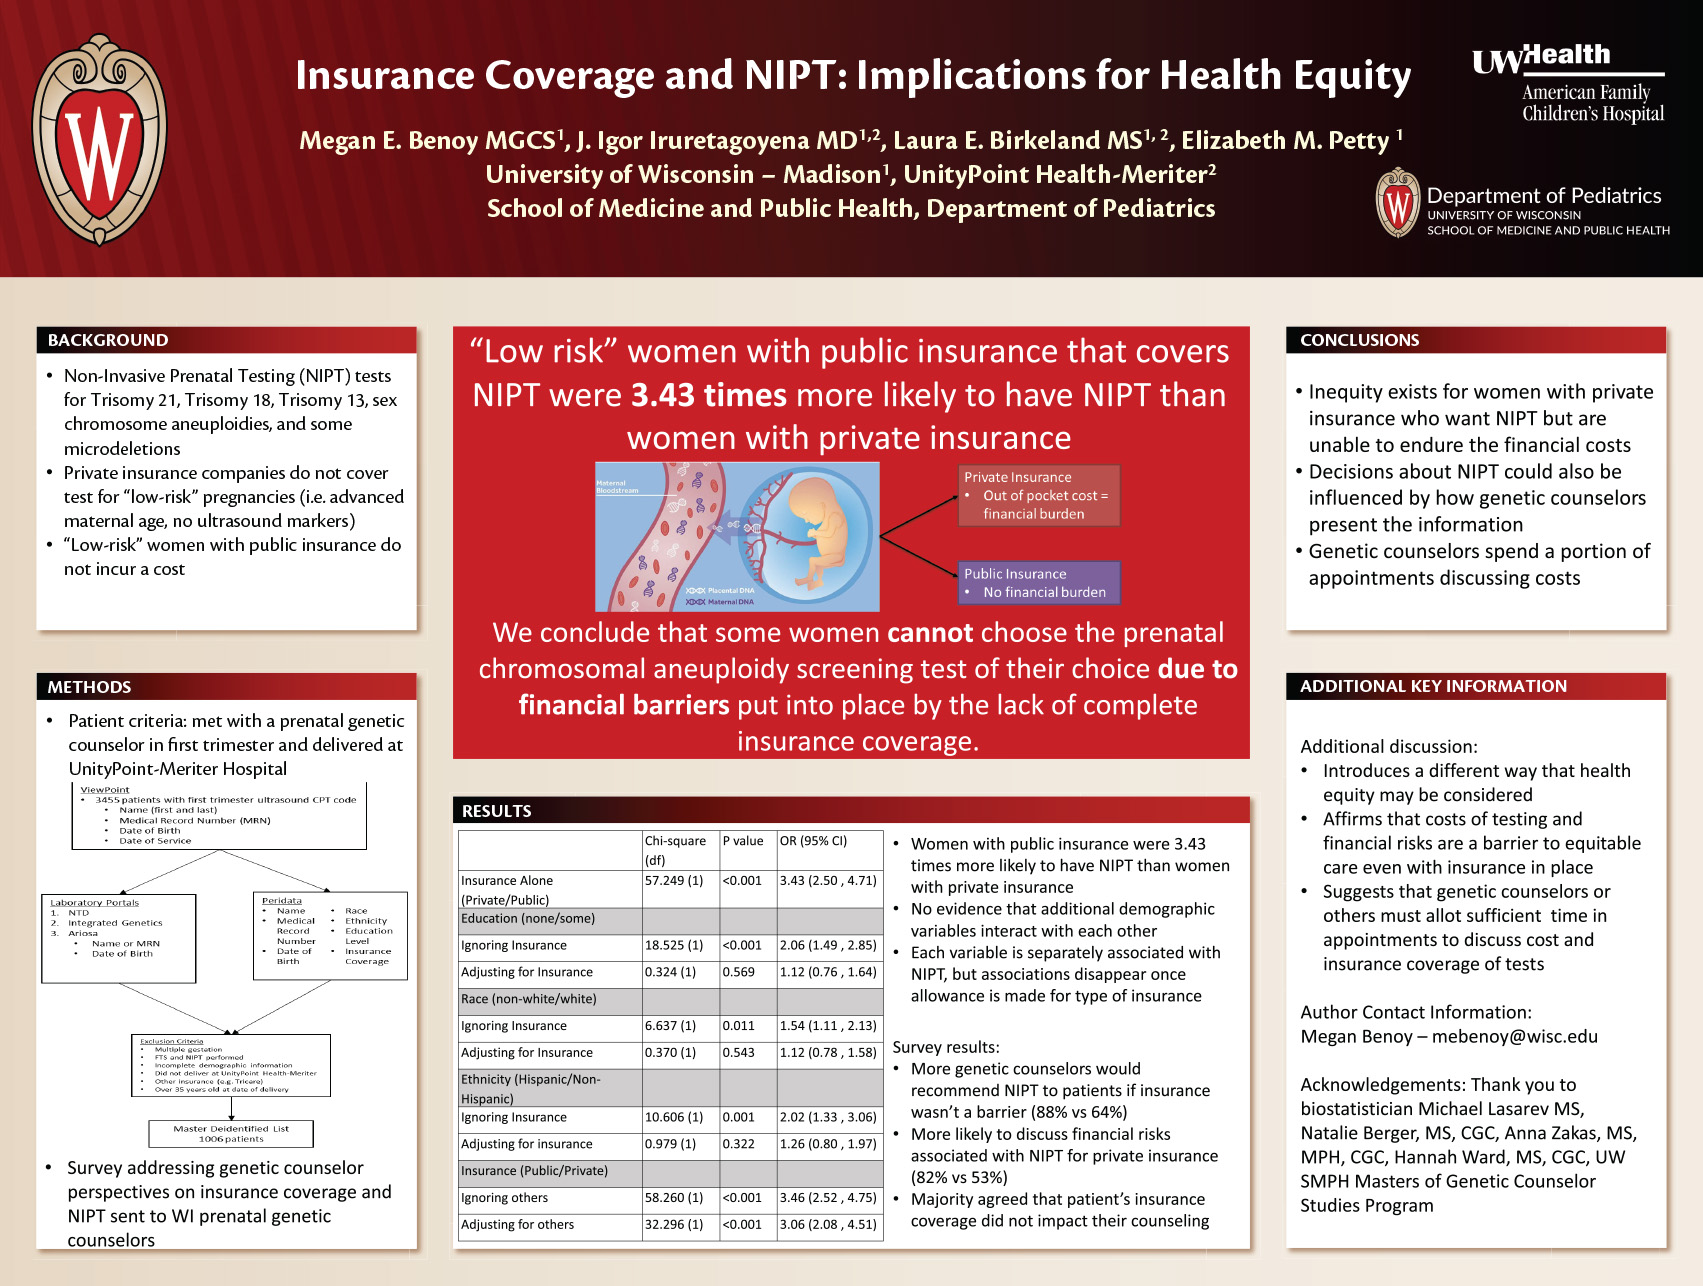 Insurance Coverage Impacts the Clinical Use of Prenatal Chromosomal Aneuploidy Screening: Implications for Health Equity poster image